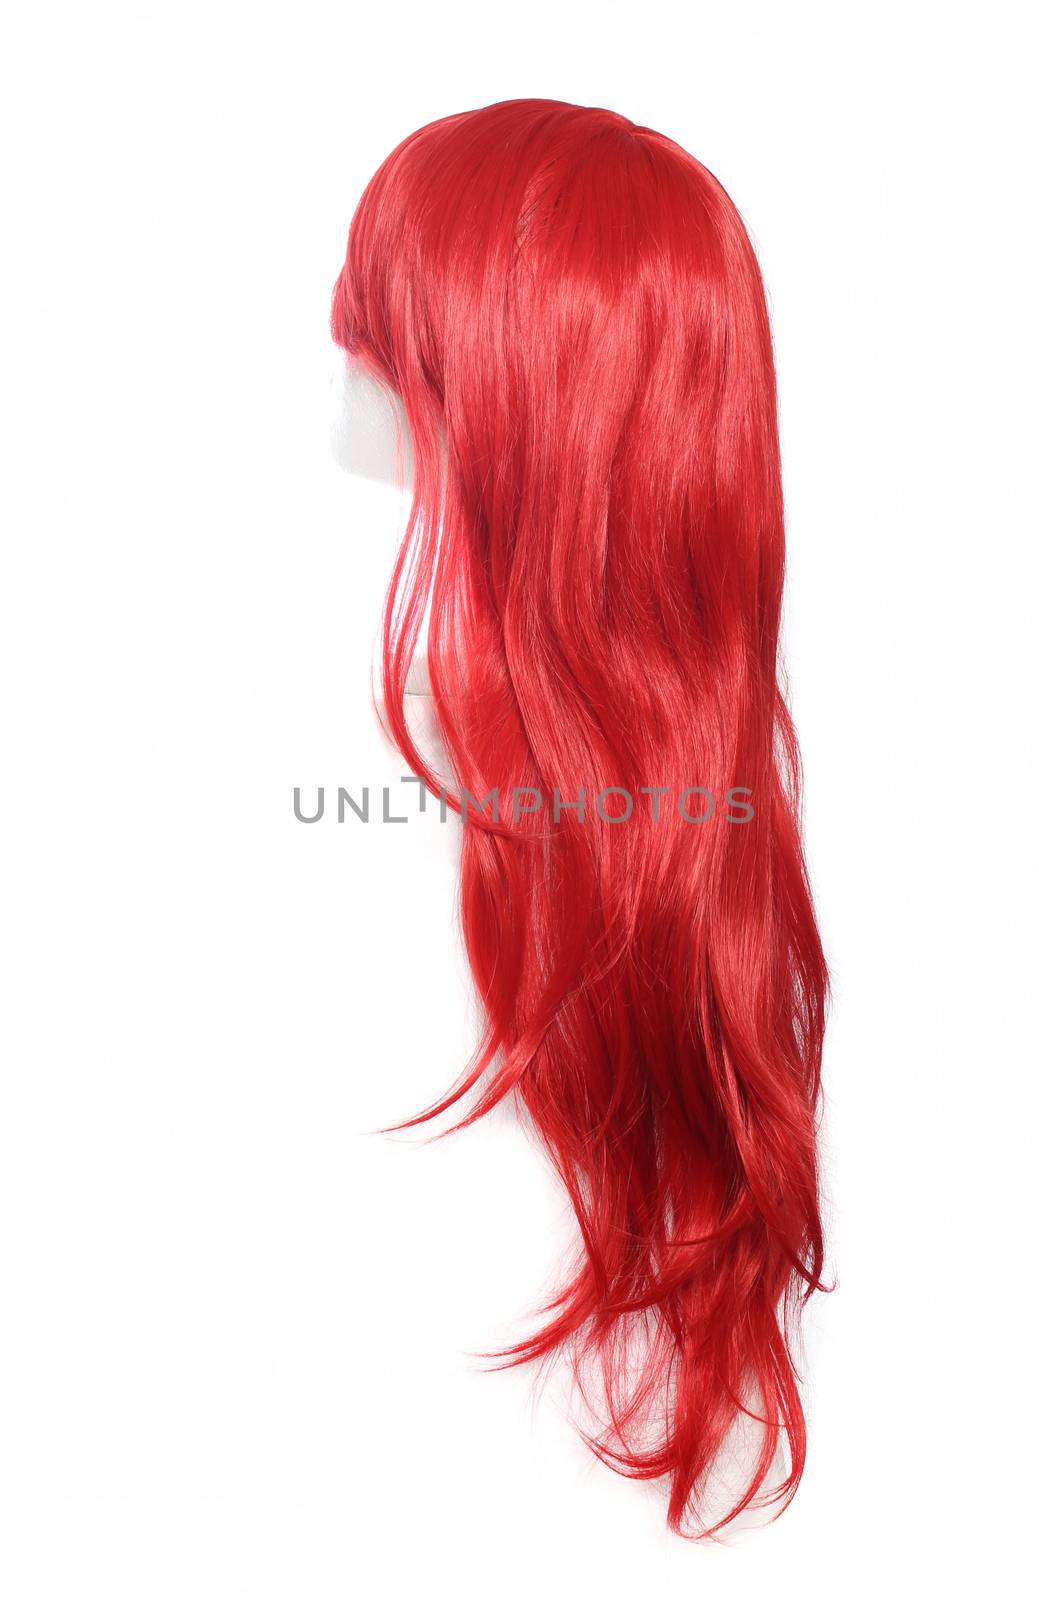 Red Wig on mannequin head isolated on white background